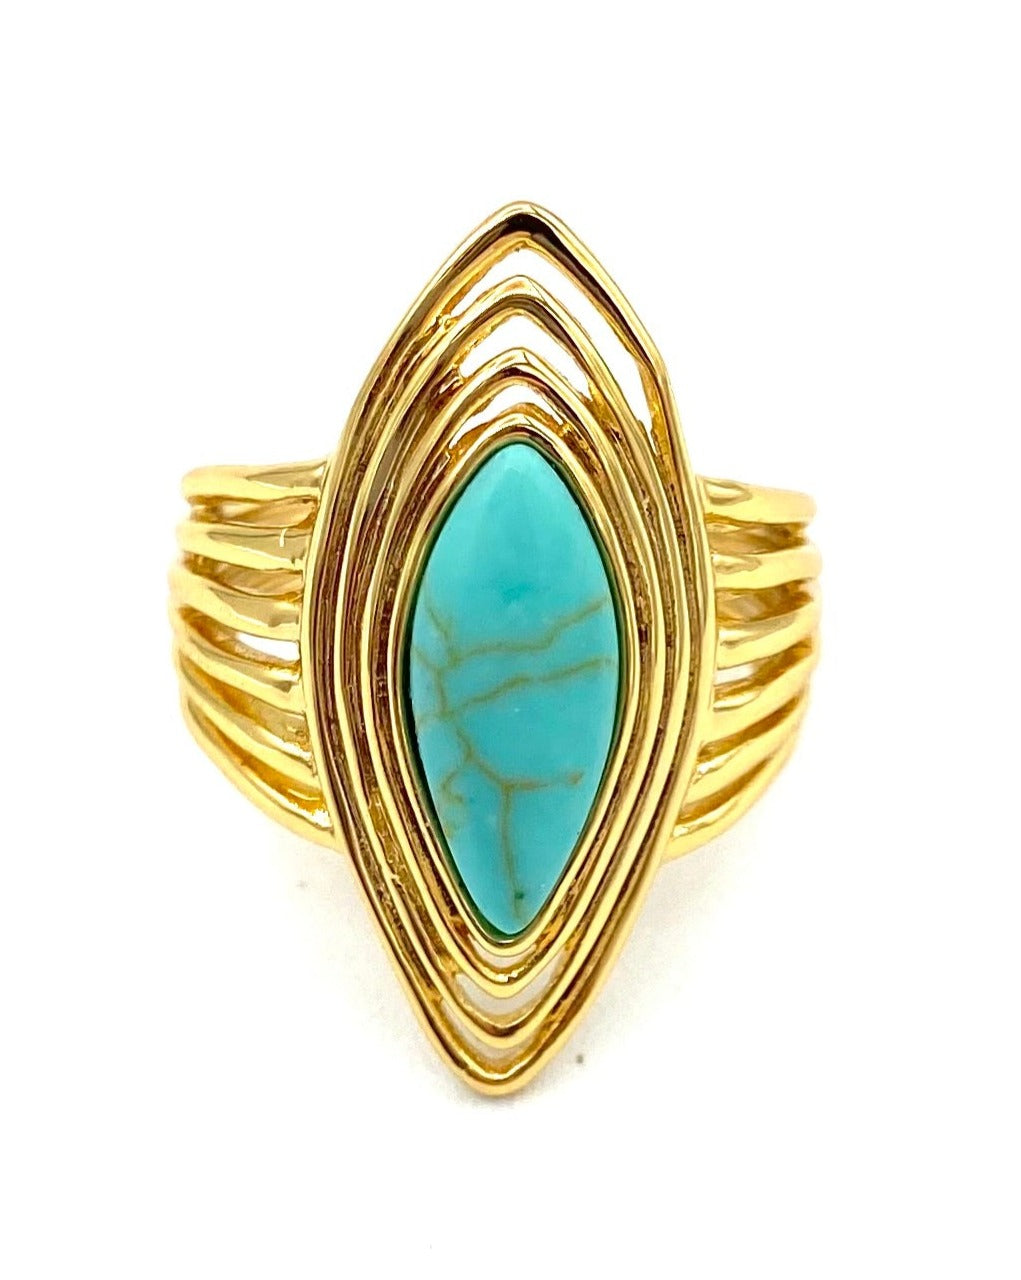 Gold and Turquoise Statement Ring - Size 7